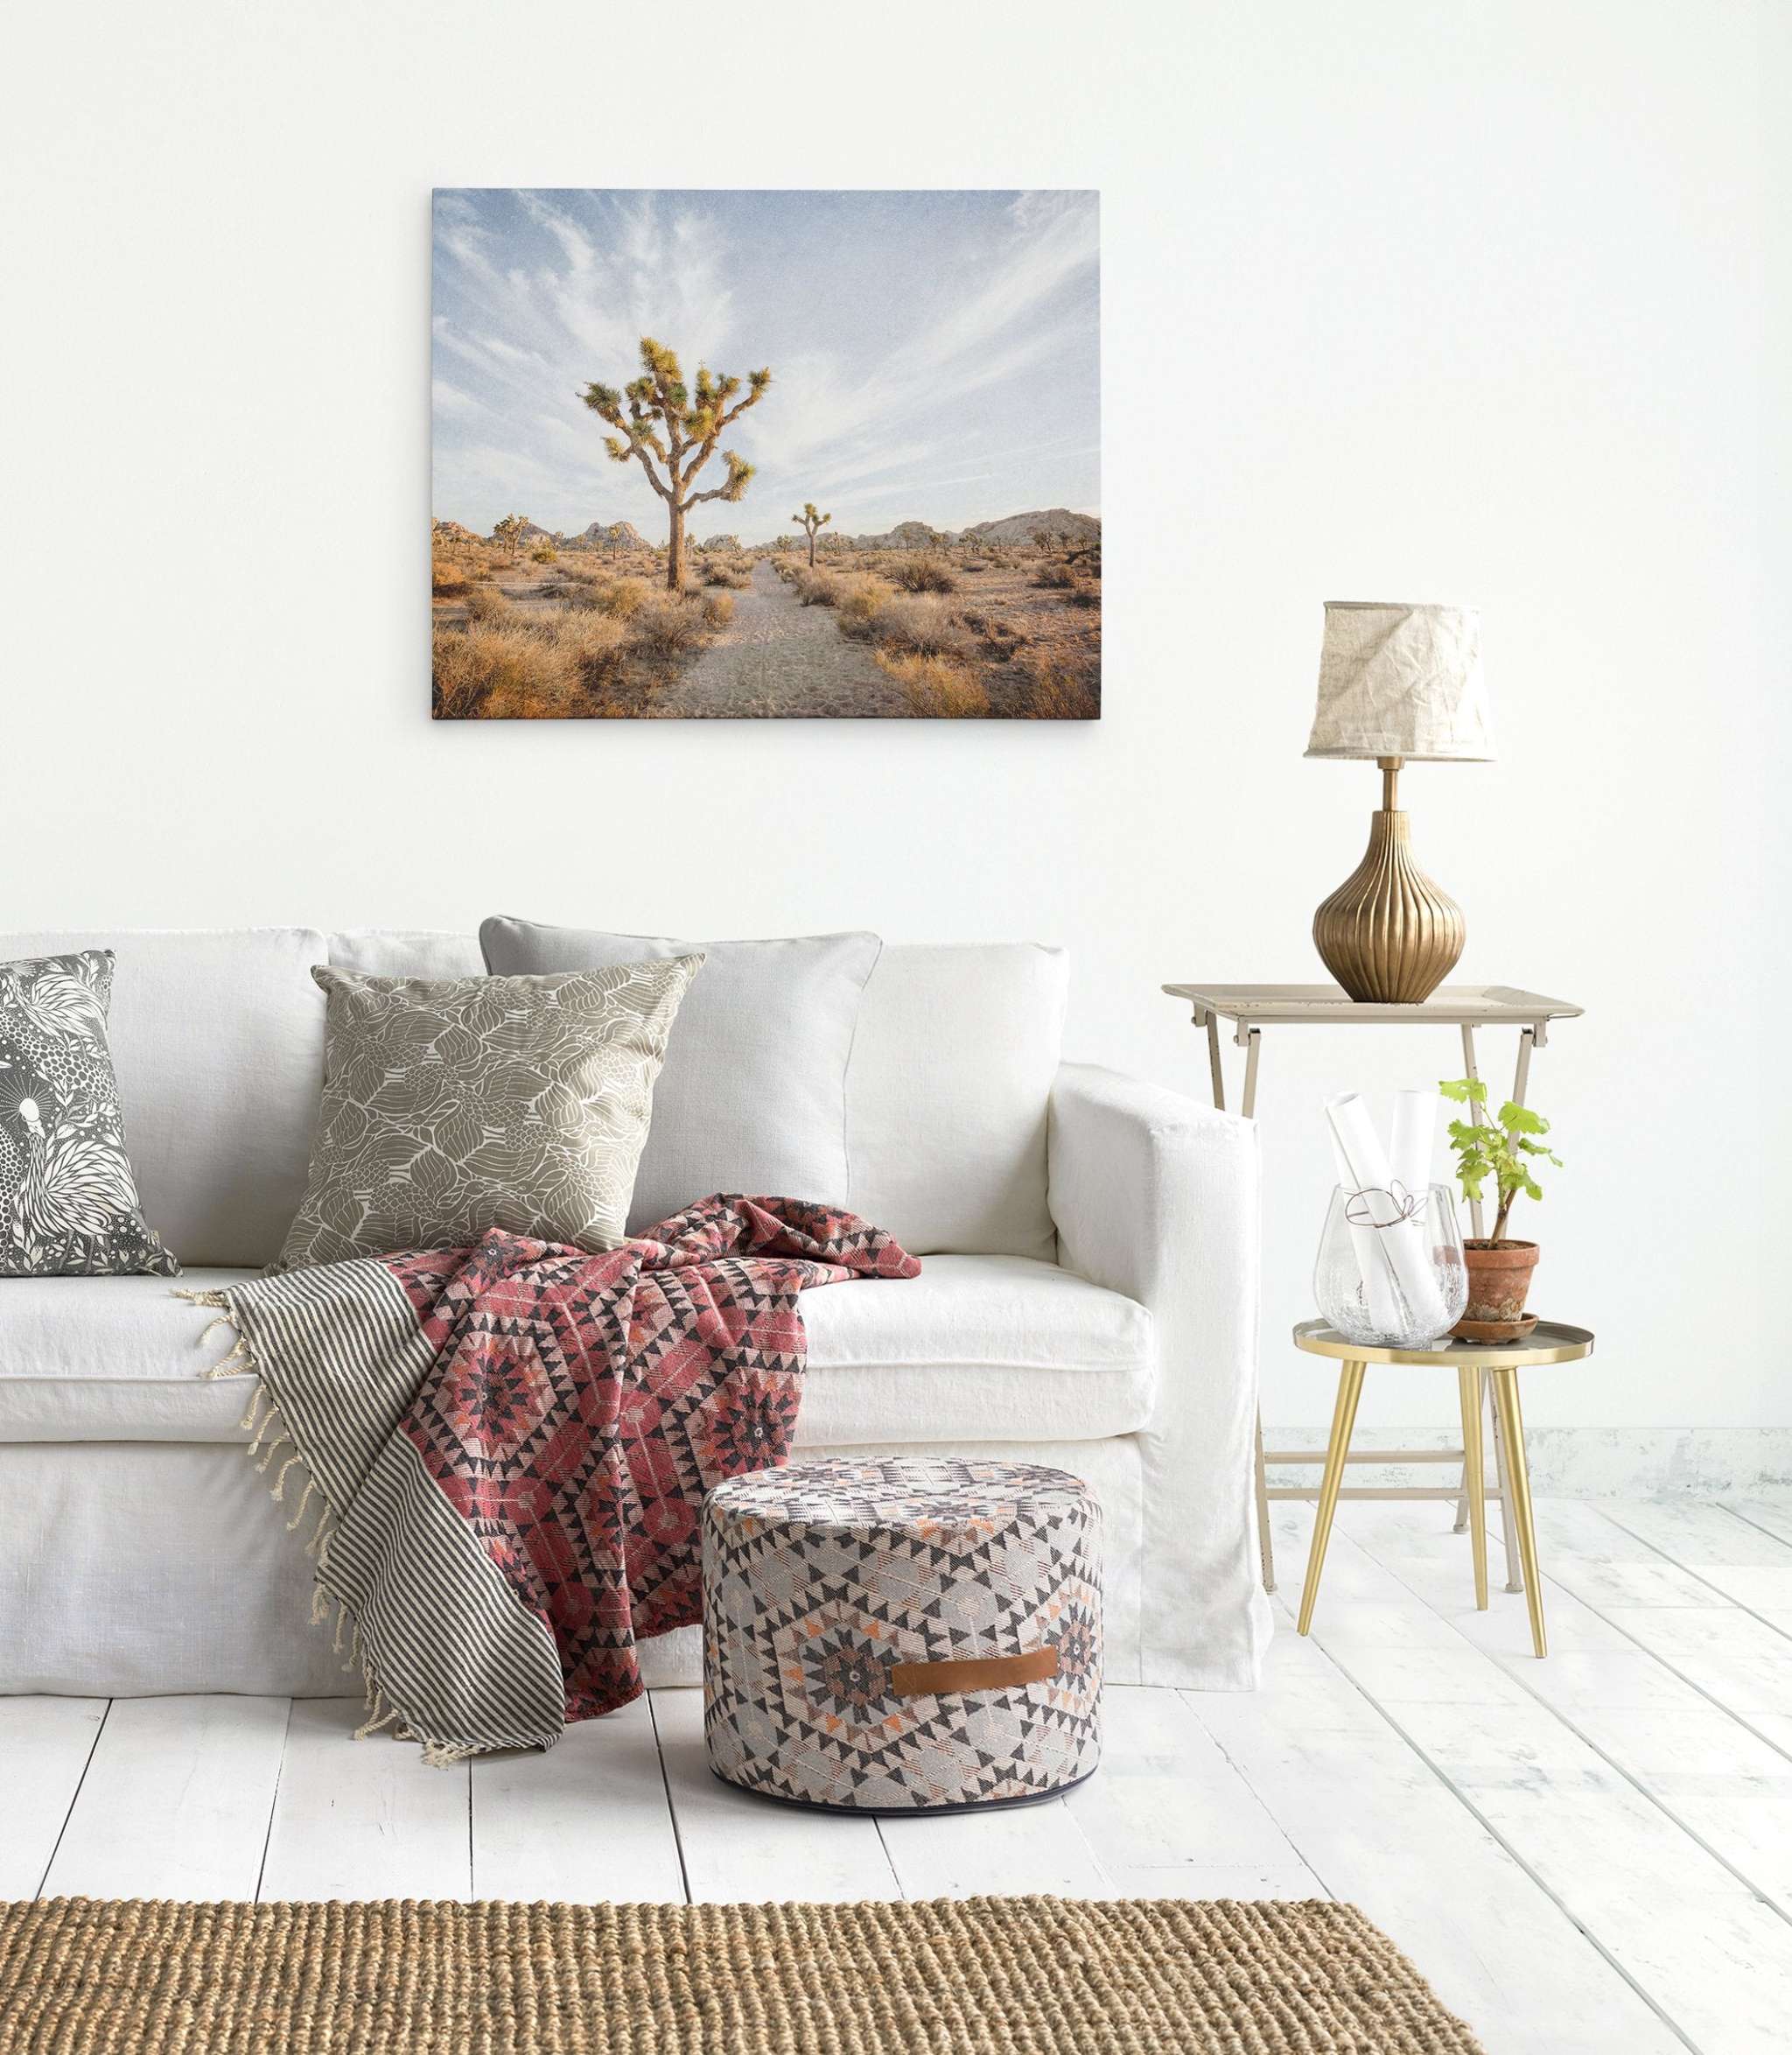 A cozy living room features a white sofa adorned with various patterned cushions and a textured throw. A round pouf with geometric designs sits in front. A side table holds a lamp, potted plant, and glass vase. Above the sofa, an Offley Green Joshua Tree Canvas Wall Art, 'Path to Joshua' completes the setting.